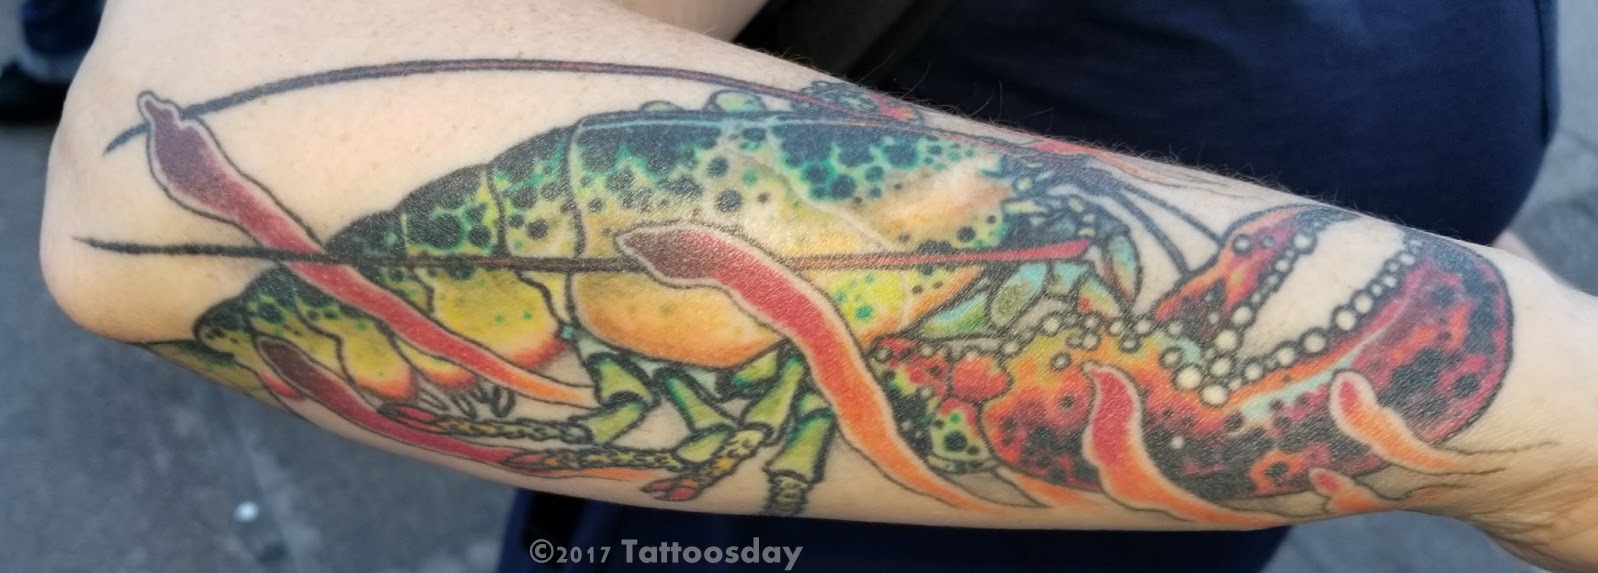 Tattoosday (A Tattoo Blog): The Elusive Union Square Lobster by